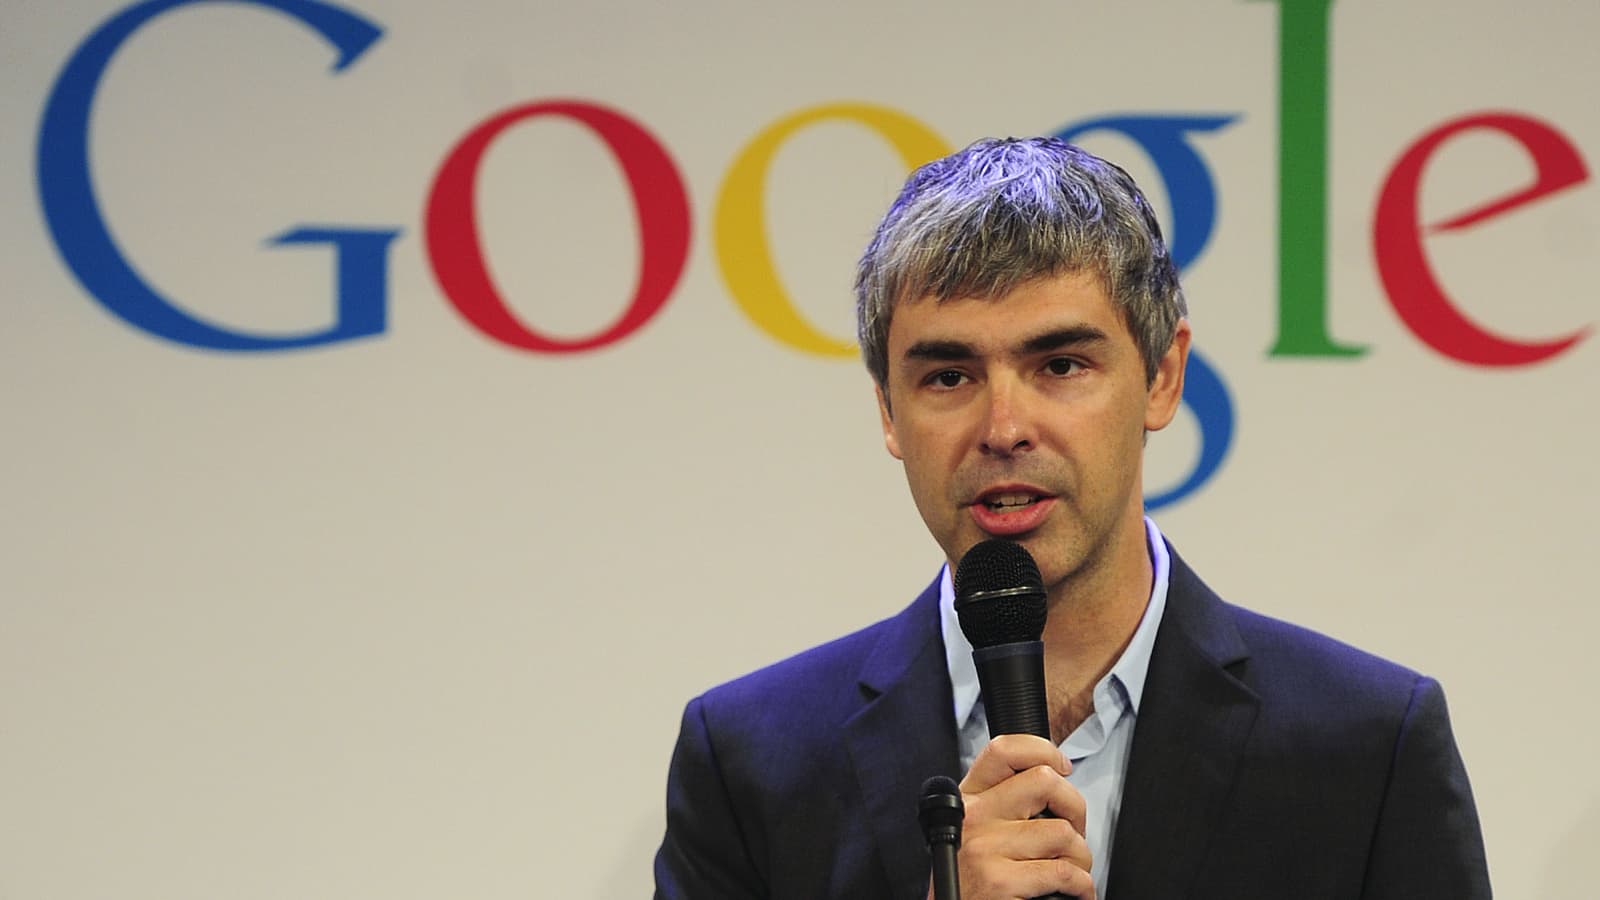 Larry Page wearing a black suit with Google logo on the back